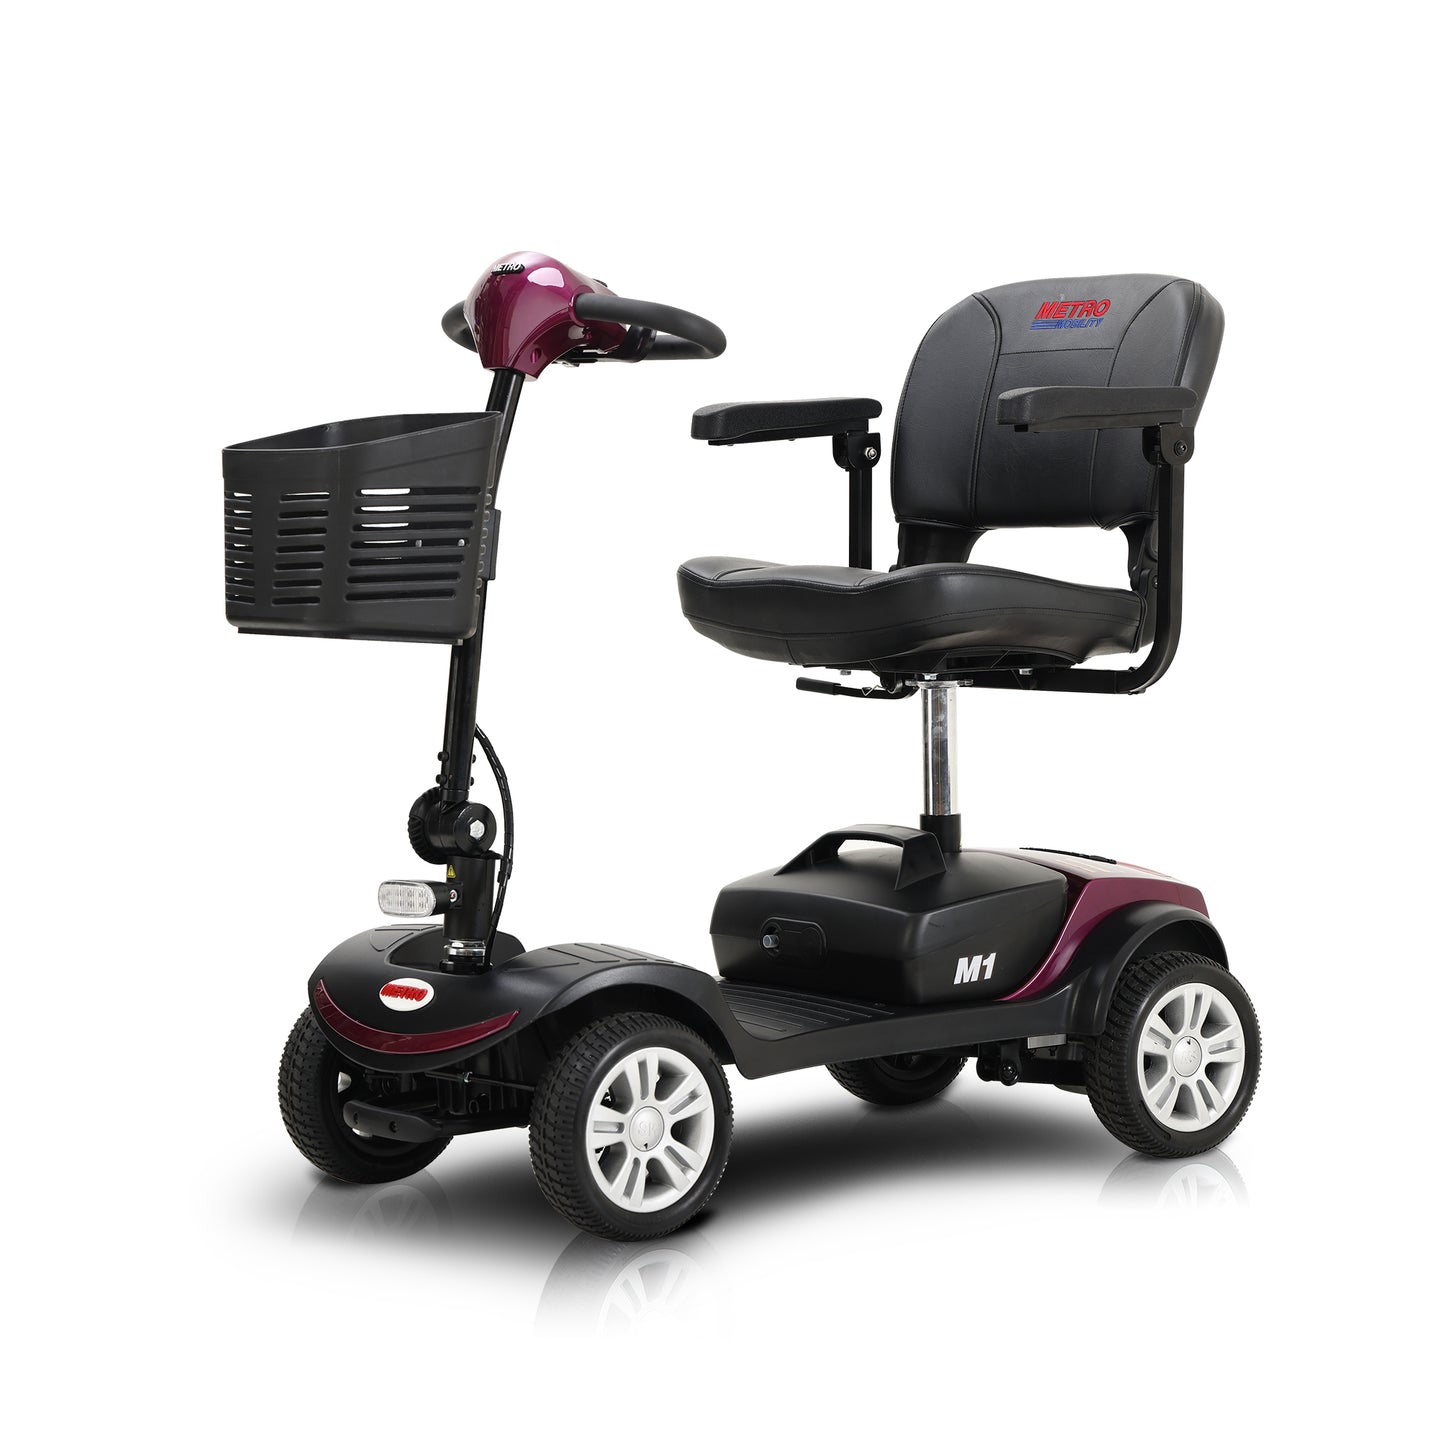 Plum Metromobility M1 Portal 4-Wheel Mobility Scooter | Compact Travel Power Mobility Scooter